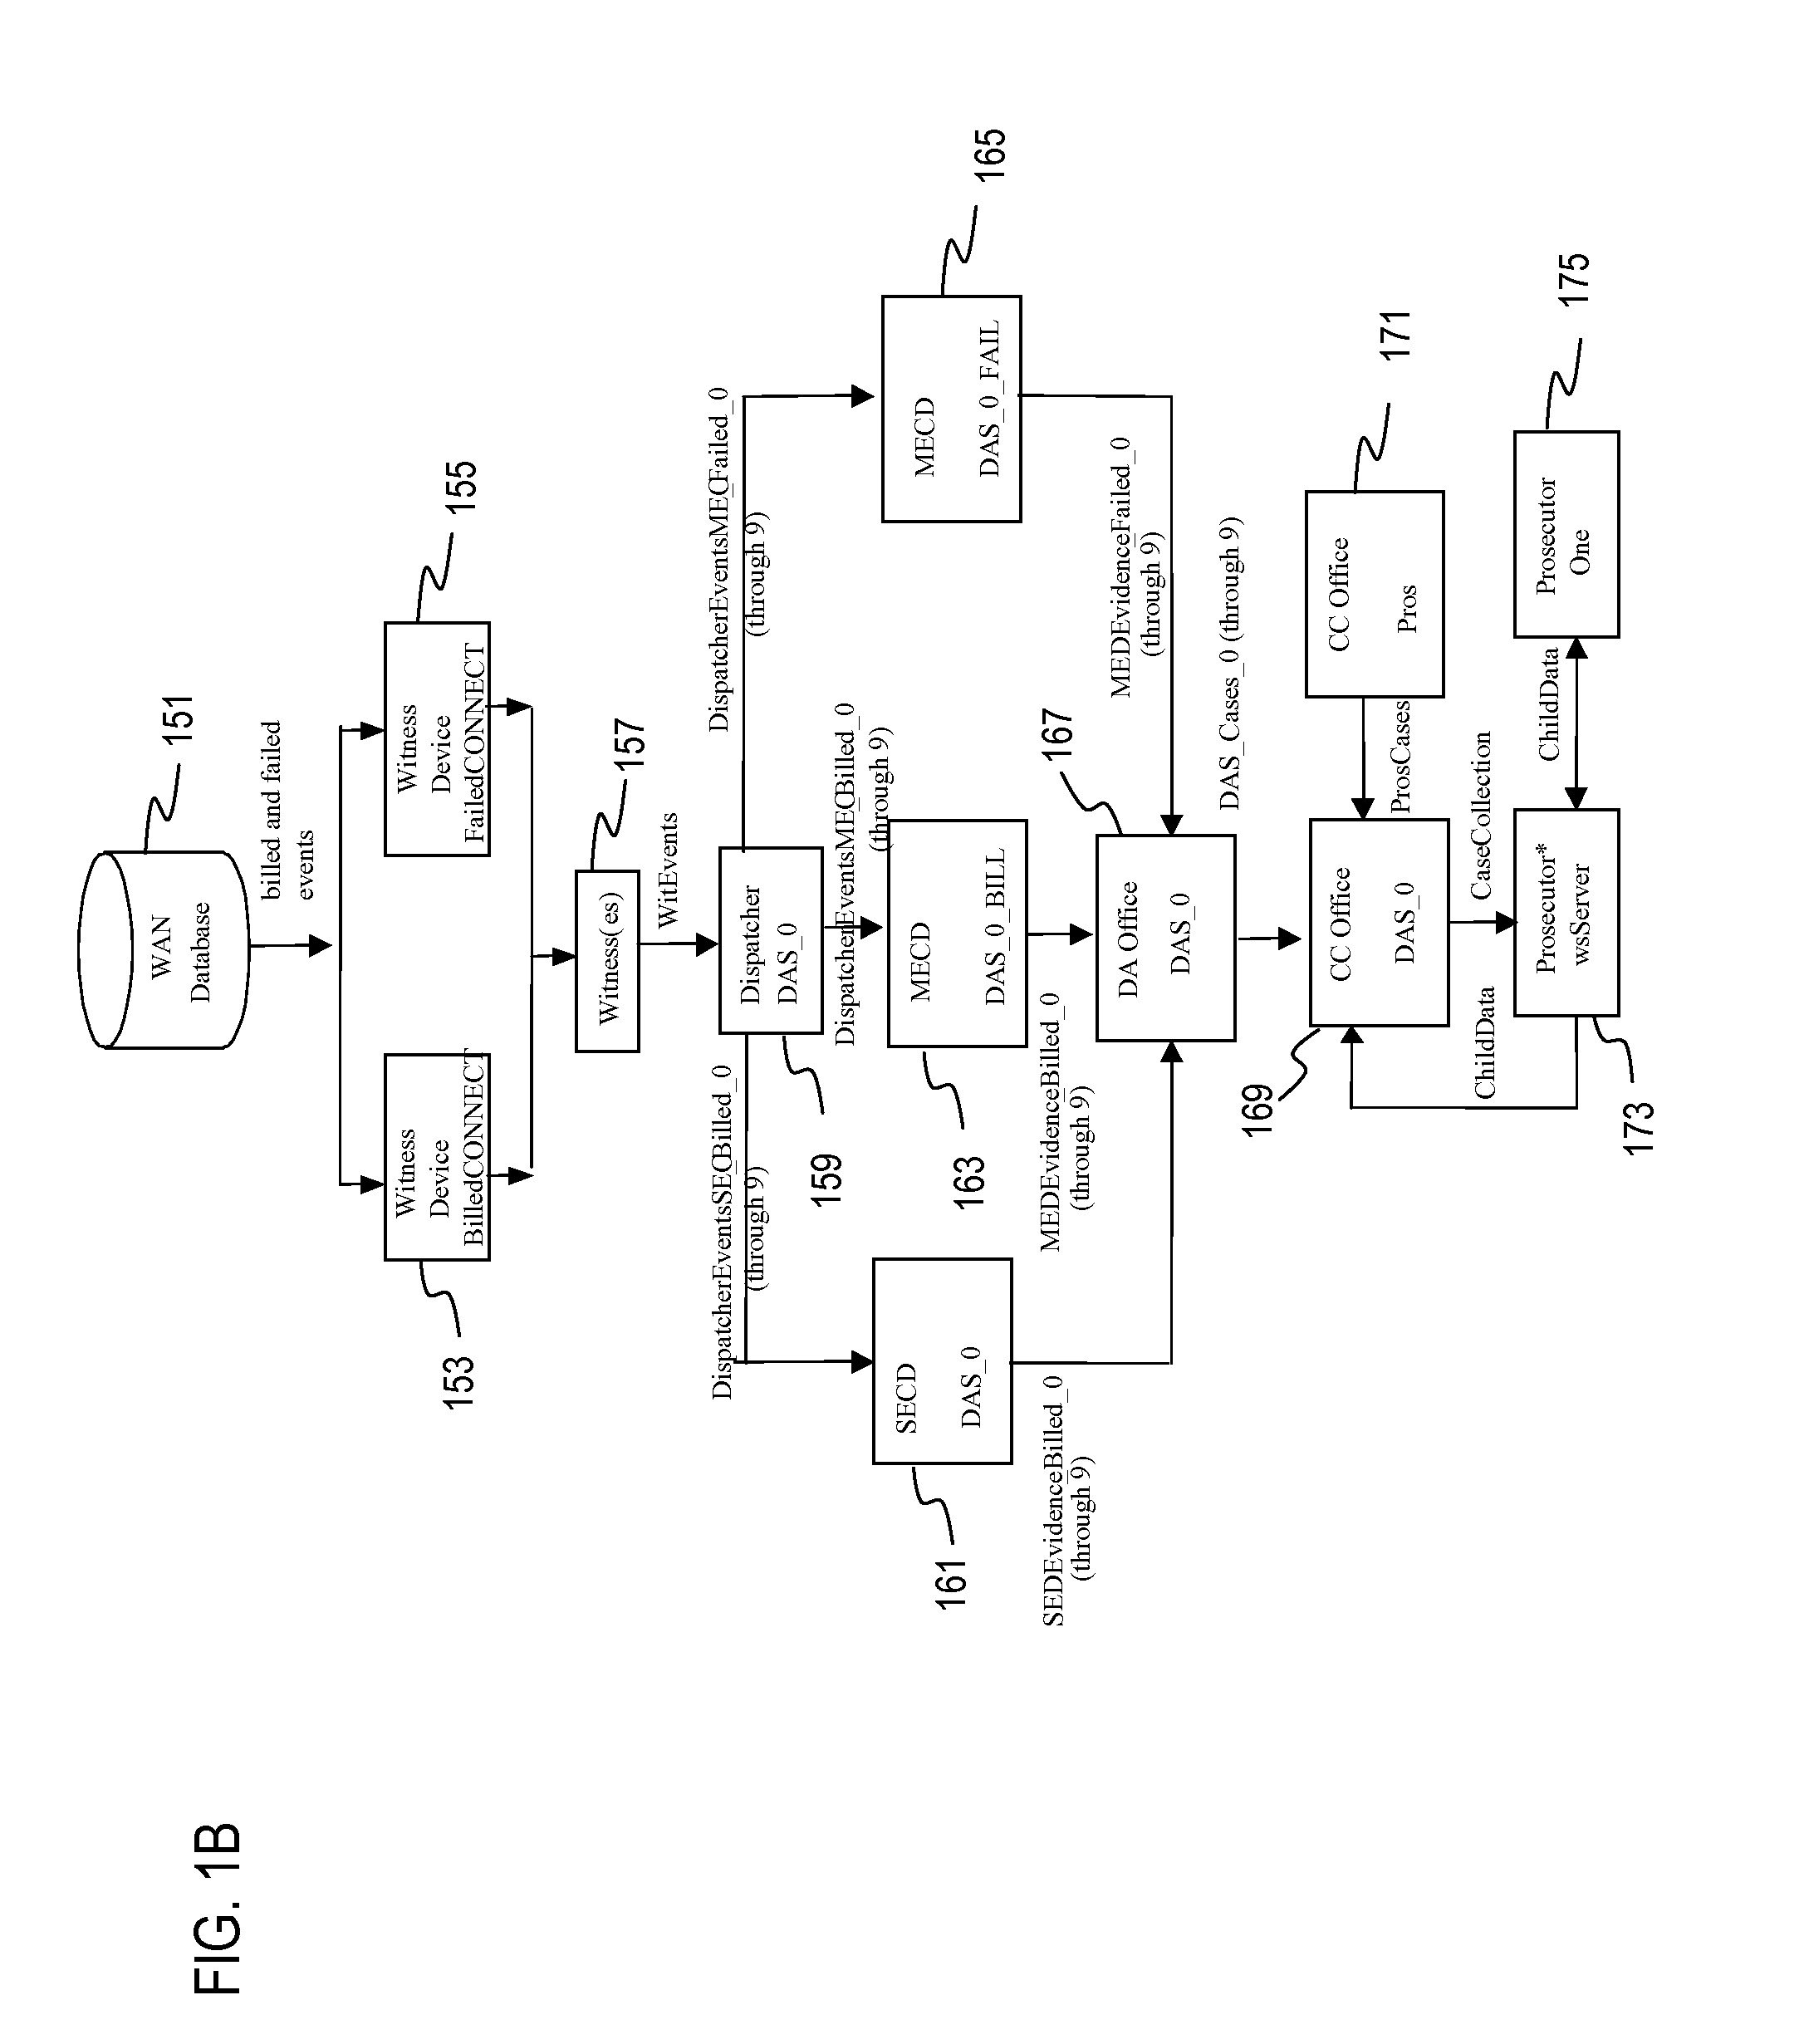 Method and apparatus for providing fraud detection using hot or cold originating attributes